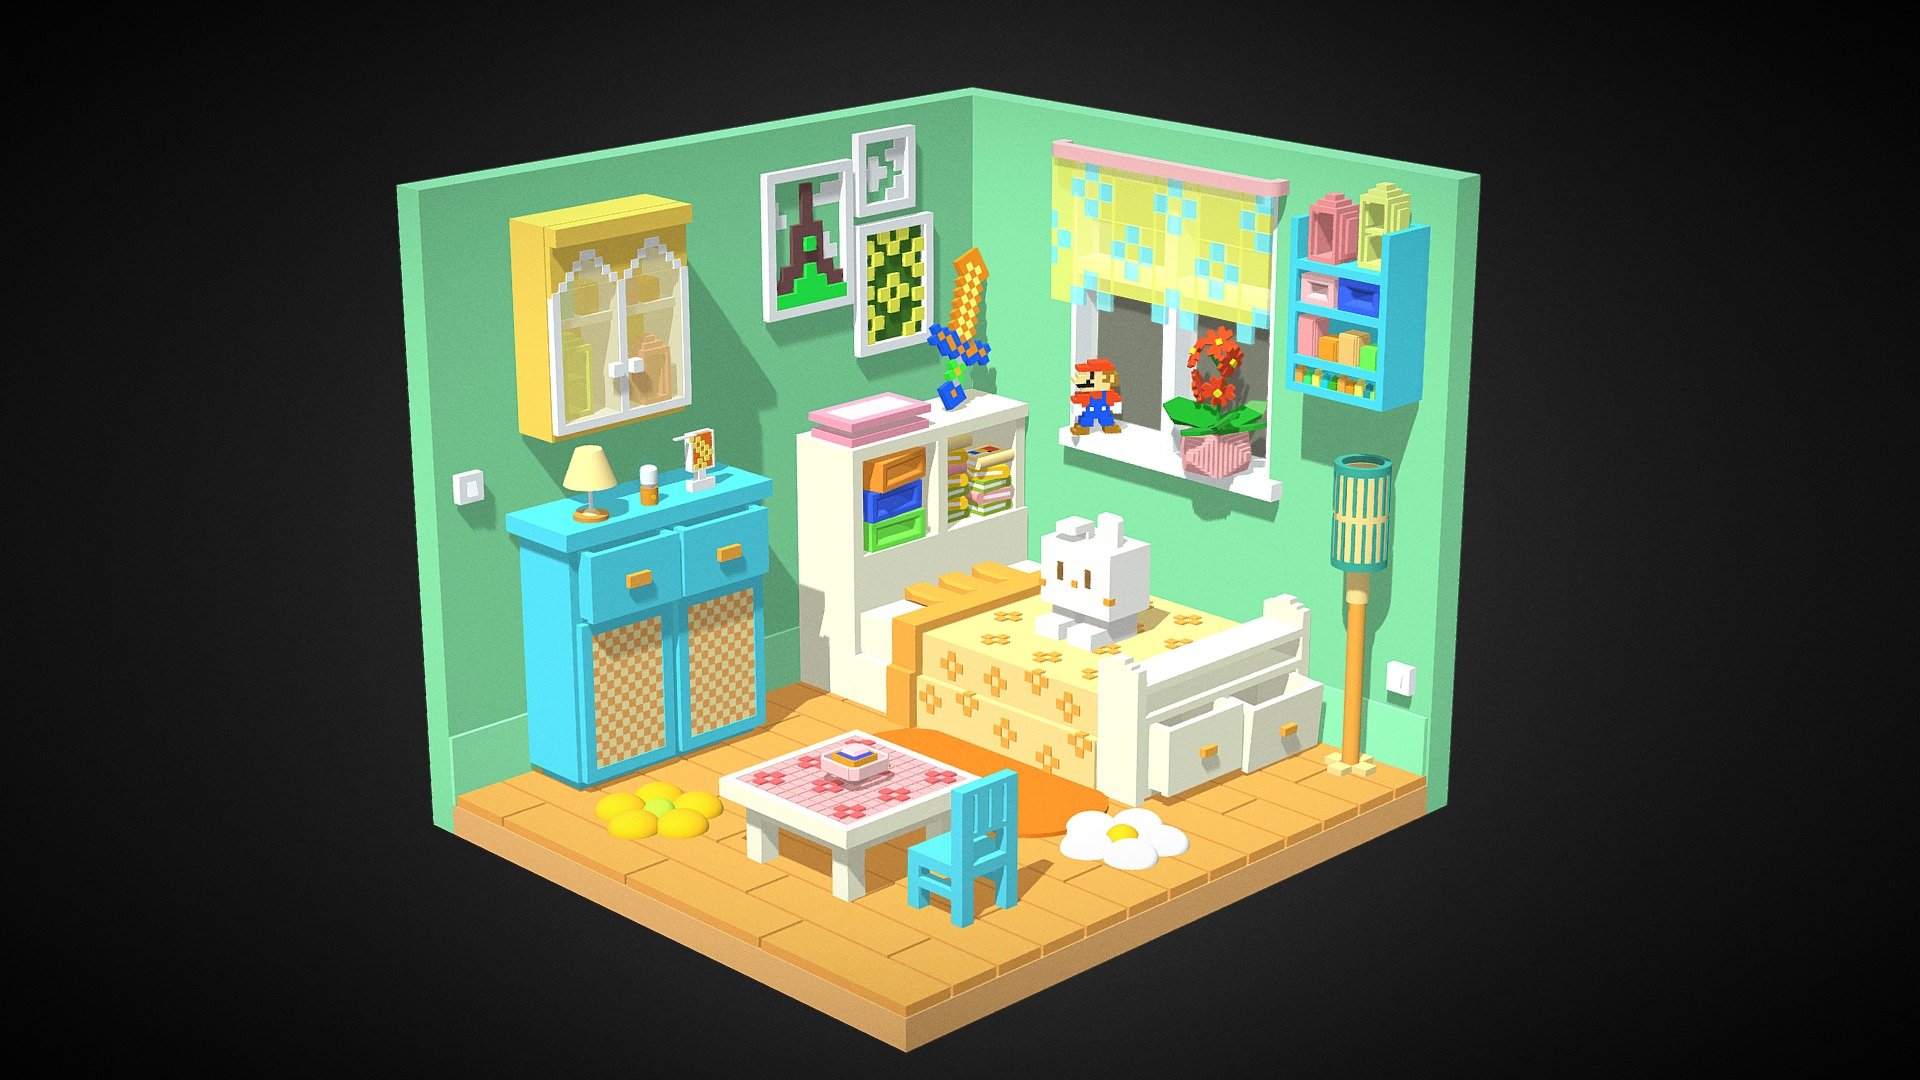 All the models are made by 🏠👉3d.xyz

Page link👉: 3d.xyz

All models are free on this page 🎉

Modeling is very easy and I would recommend anyone to try it ！ 😁😻🎁 - Cartoon Bedroom - Download Free 3D model by 3d.xyz (@webuild) 3d model